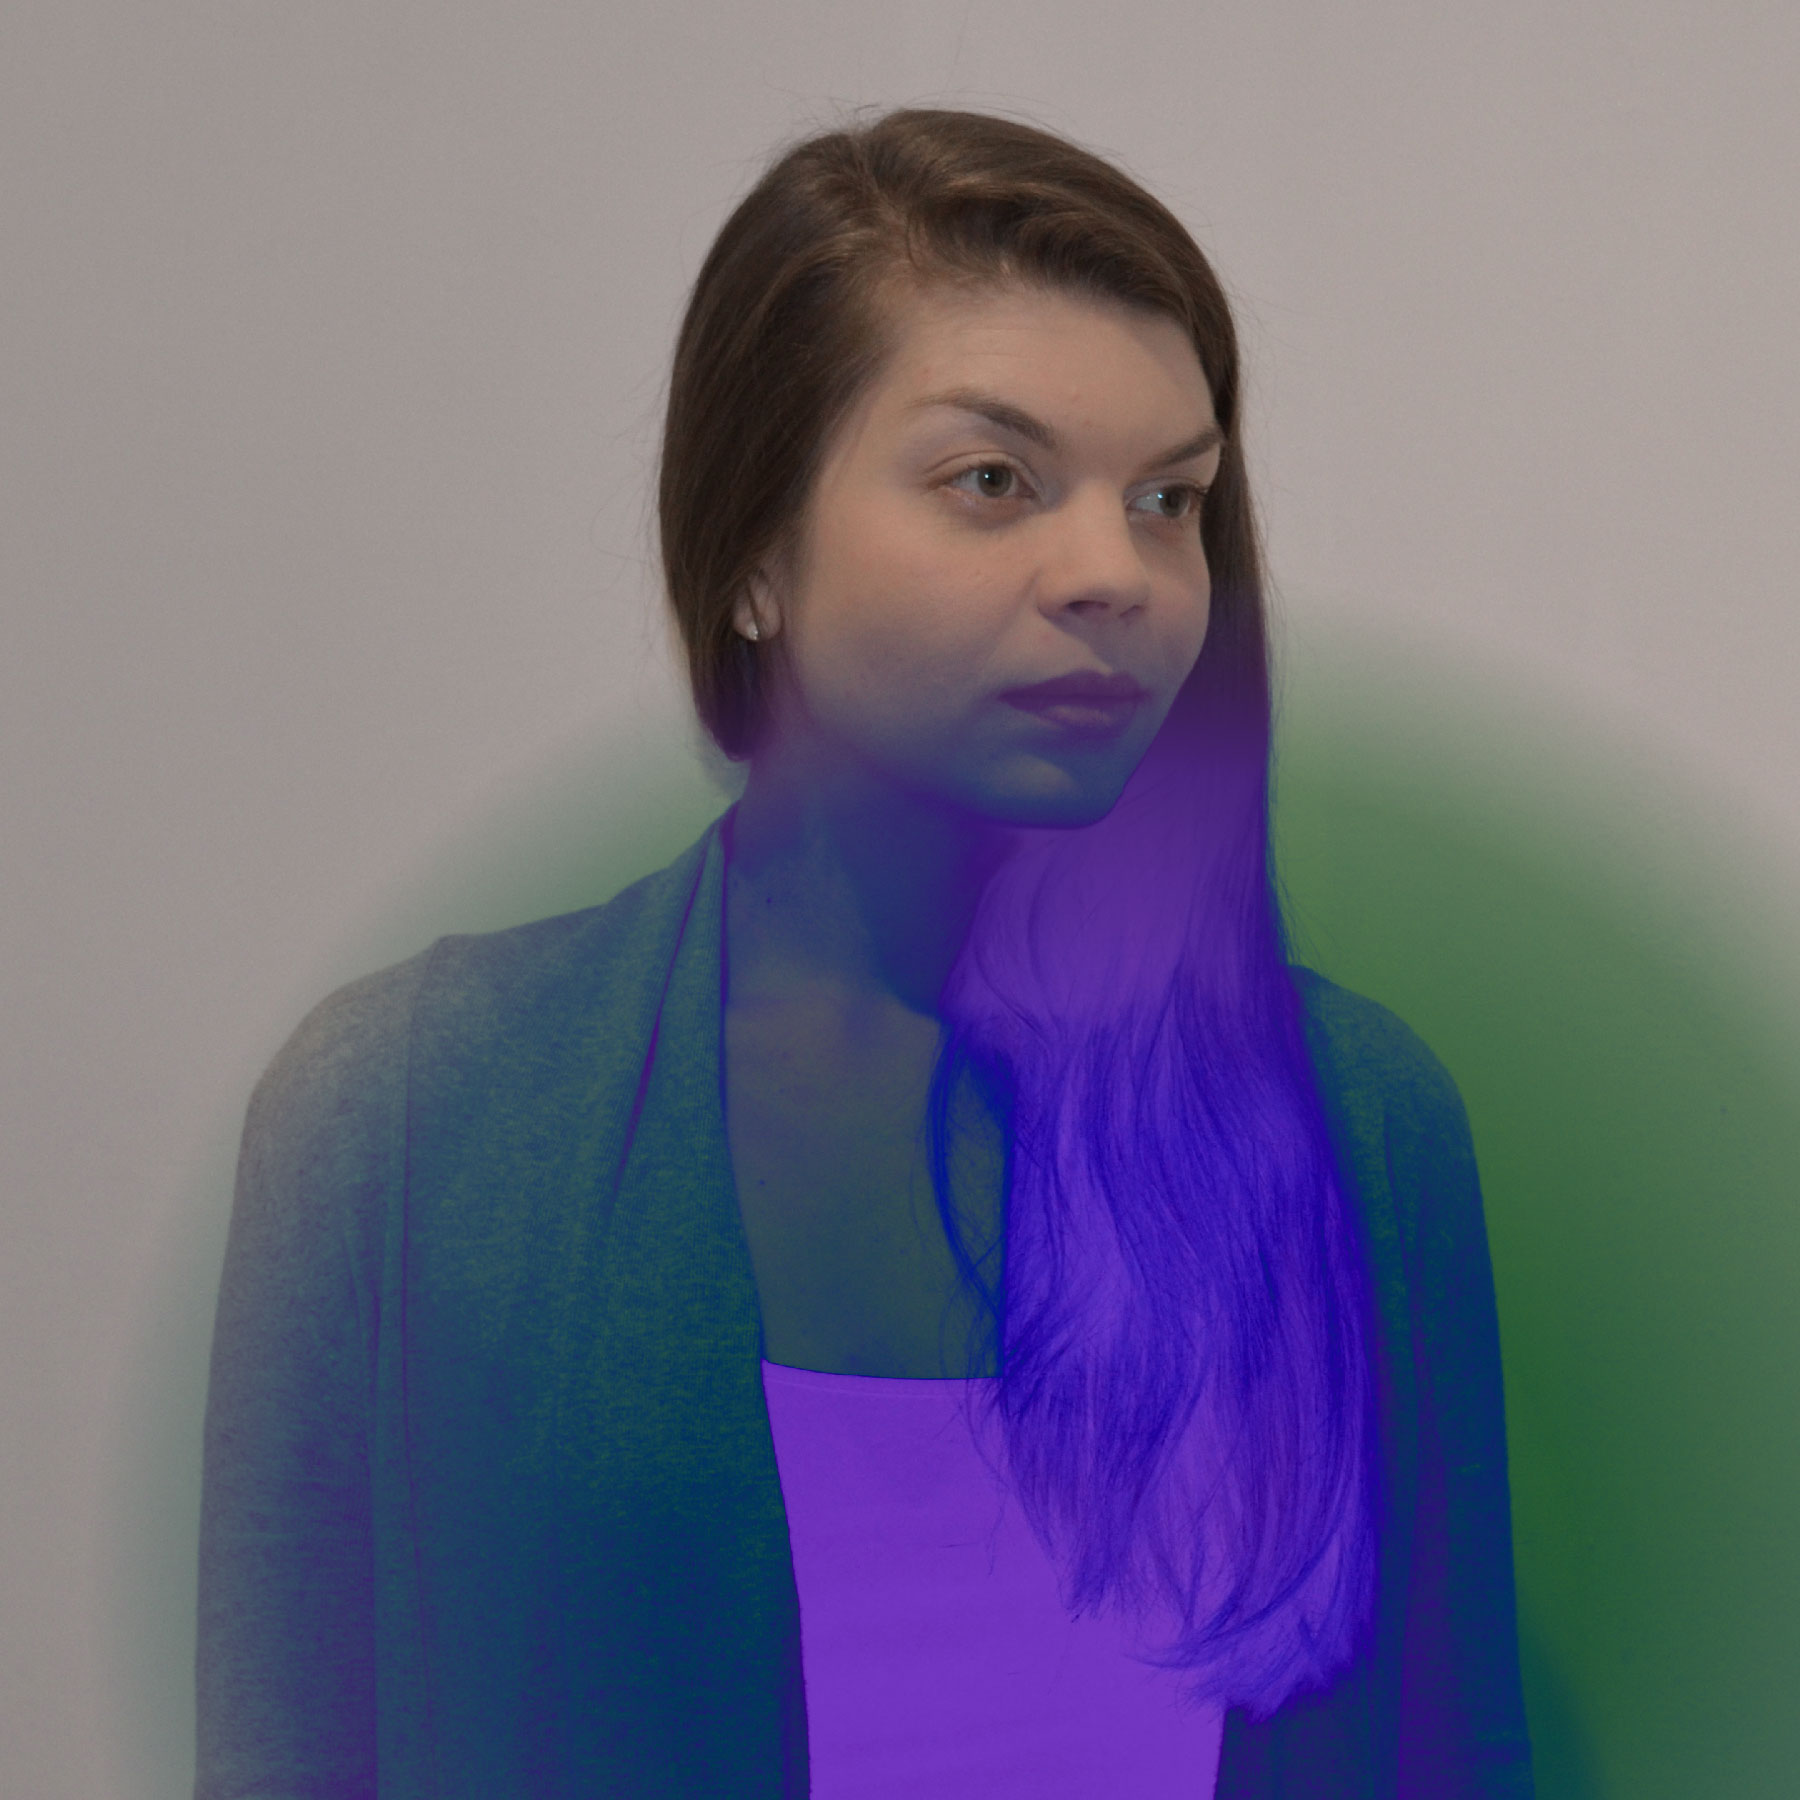 A light-skinned woman with long dark hair looks away from the camera in a diagonal direction. The lower right quadrant of the image looks digitally manipulated to give it a bright blue and purple exposure.